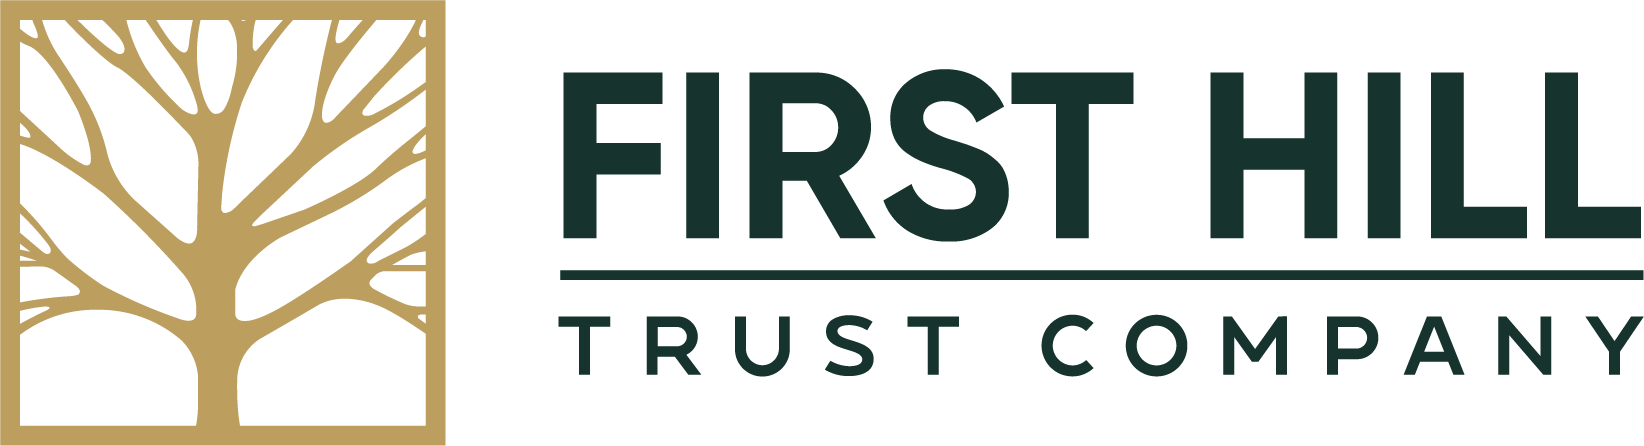 First Hill Trust Company / Benefit Administration Company LLC